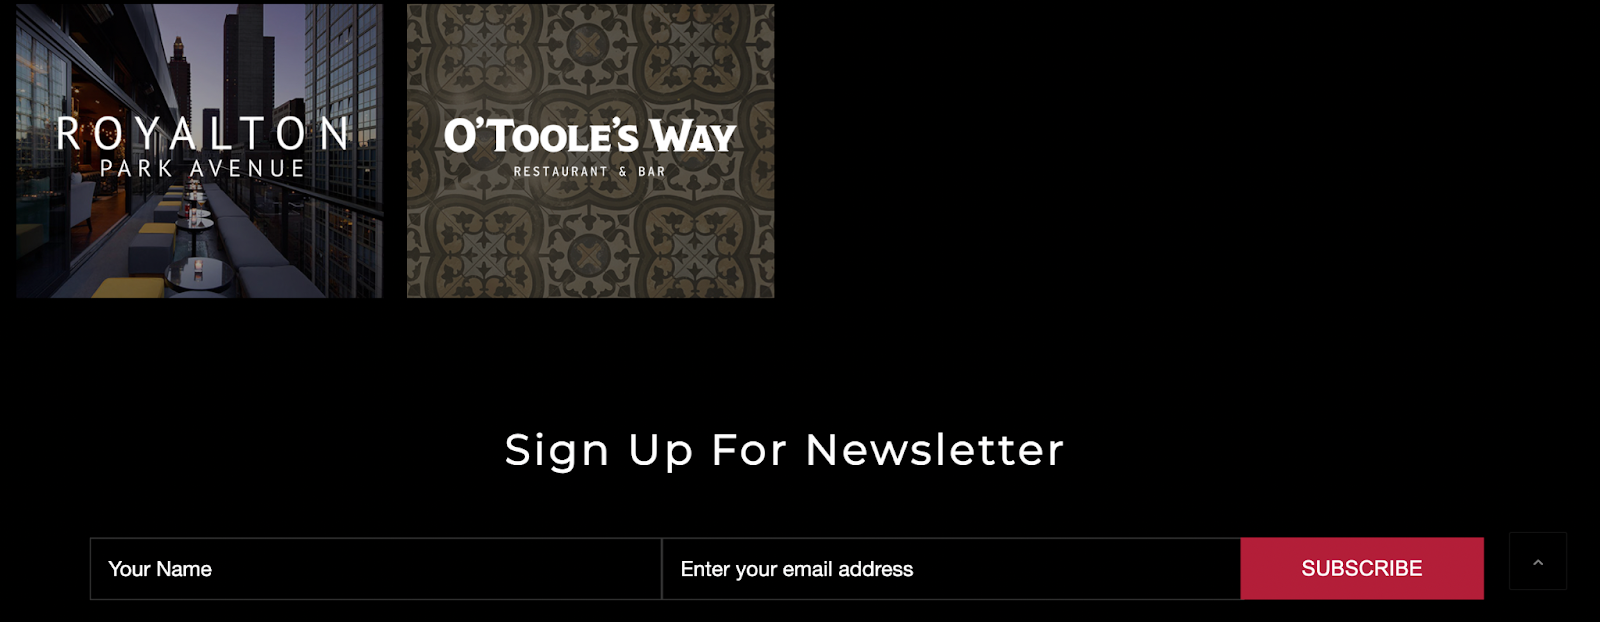 Newsletter Email Marketing Subscription Form